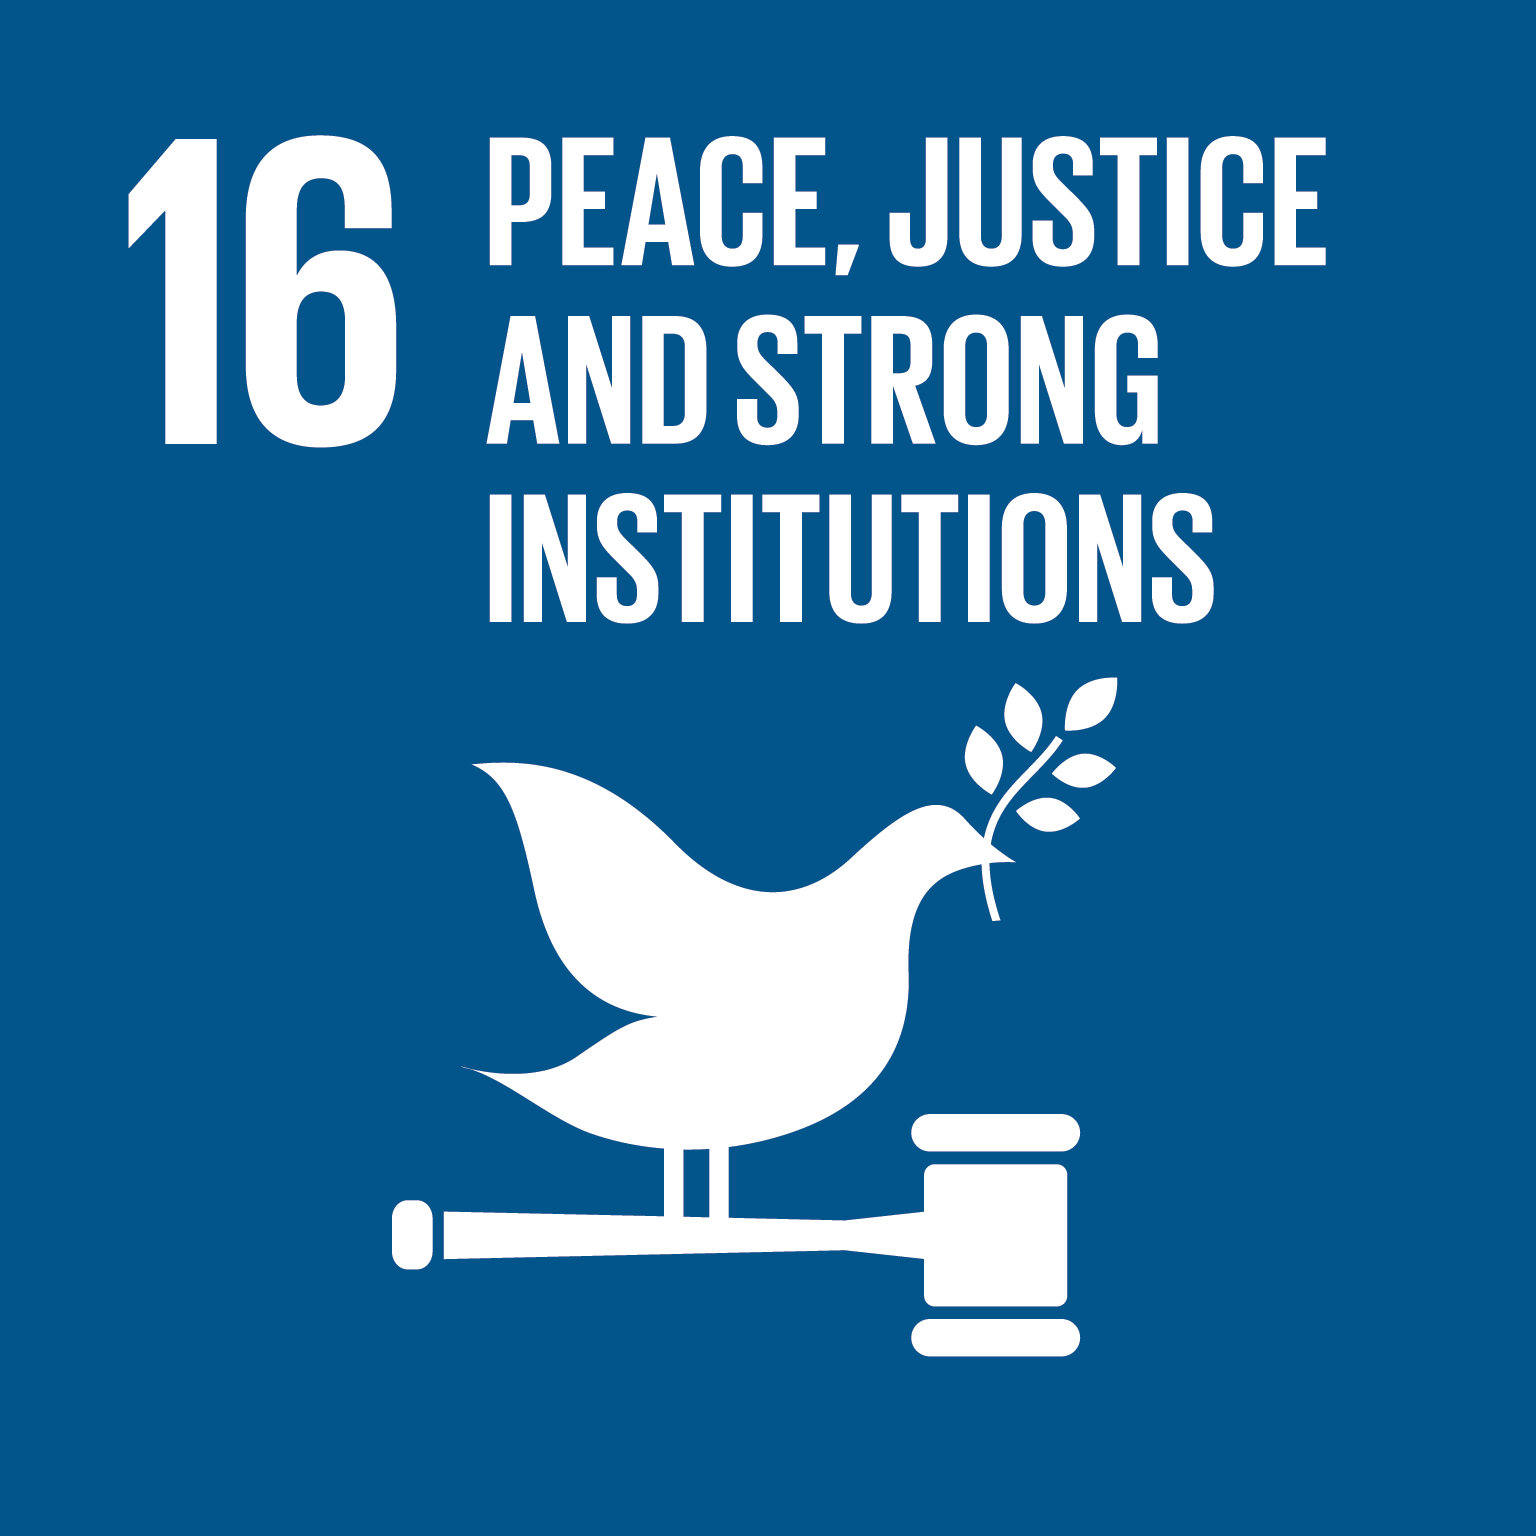 Goal 16 - Peace, Justice, and Strong Institutions